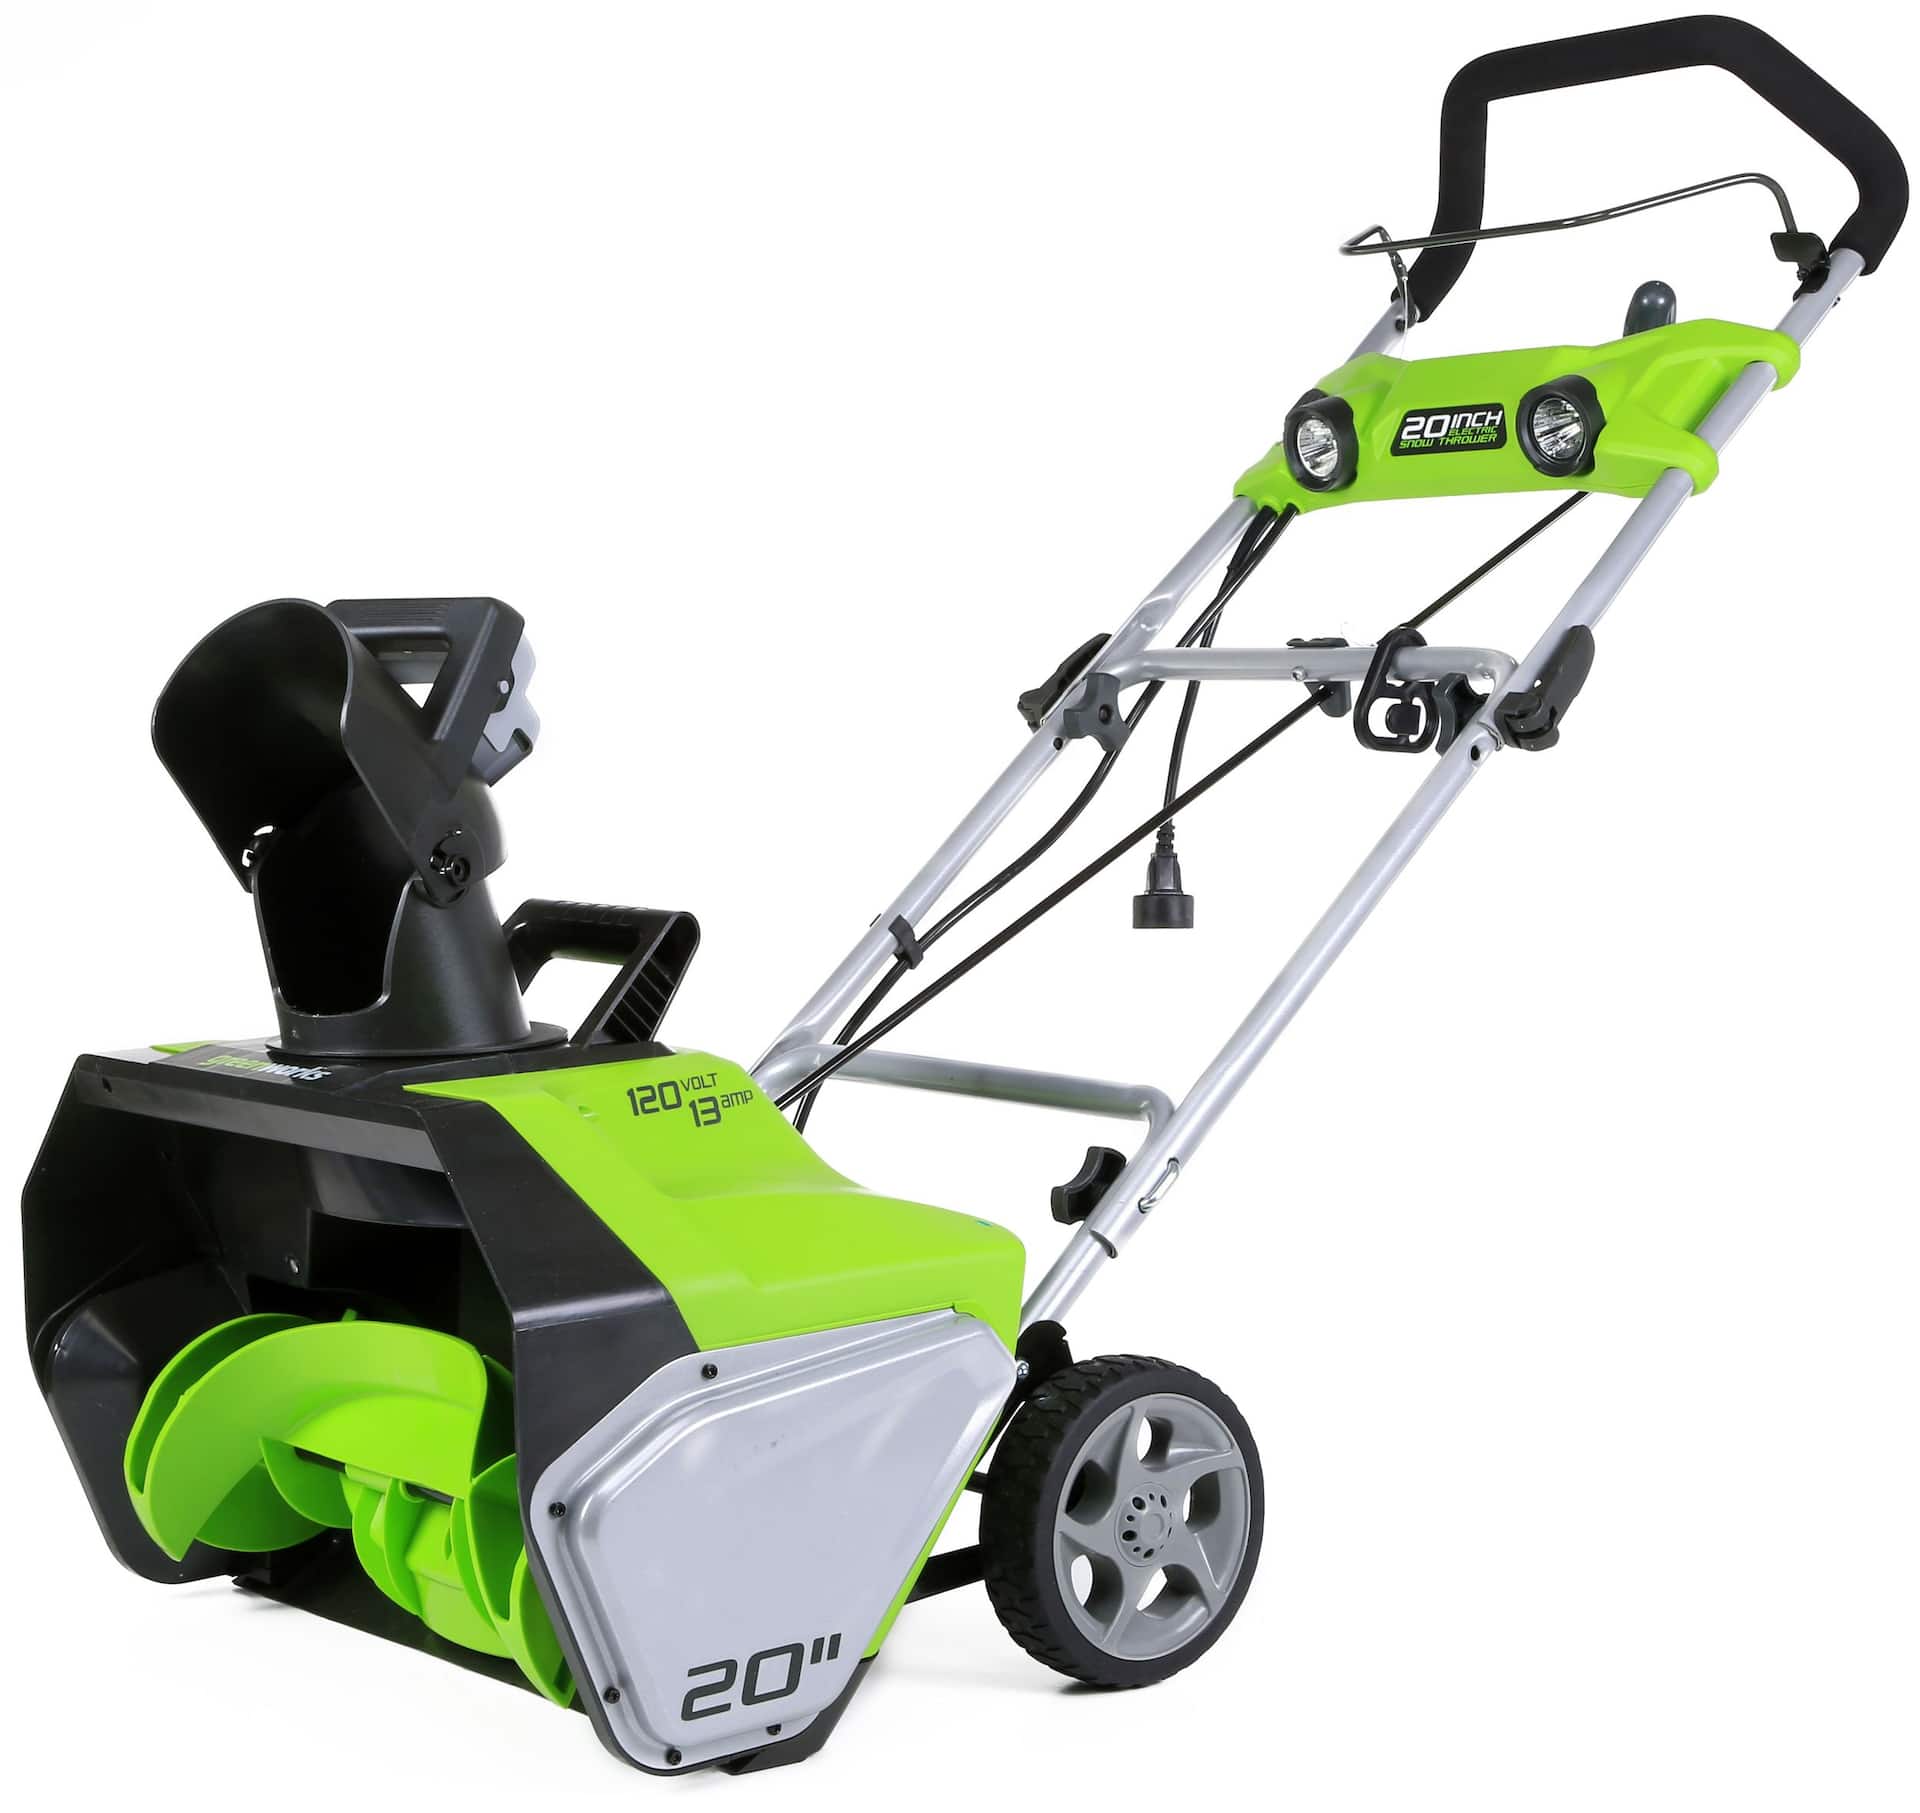 Greenworks13A Electric Snowthrower, 20-in Canadian Tire